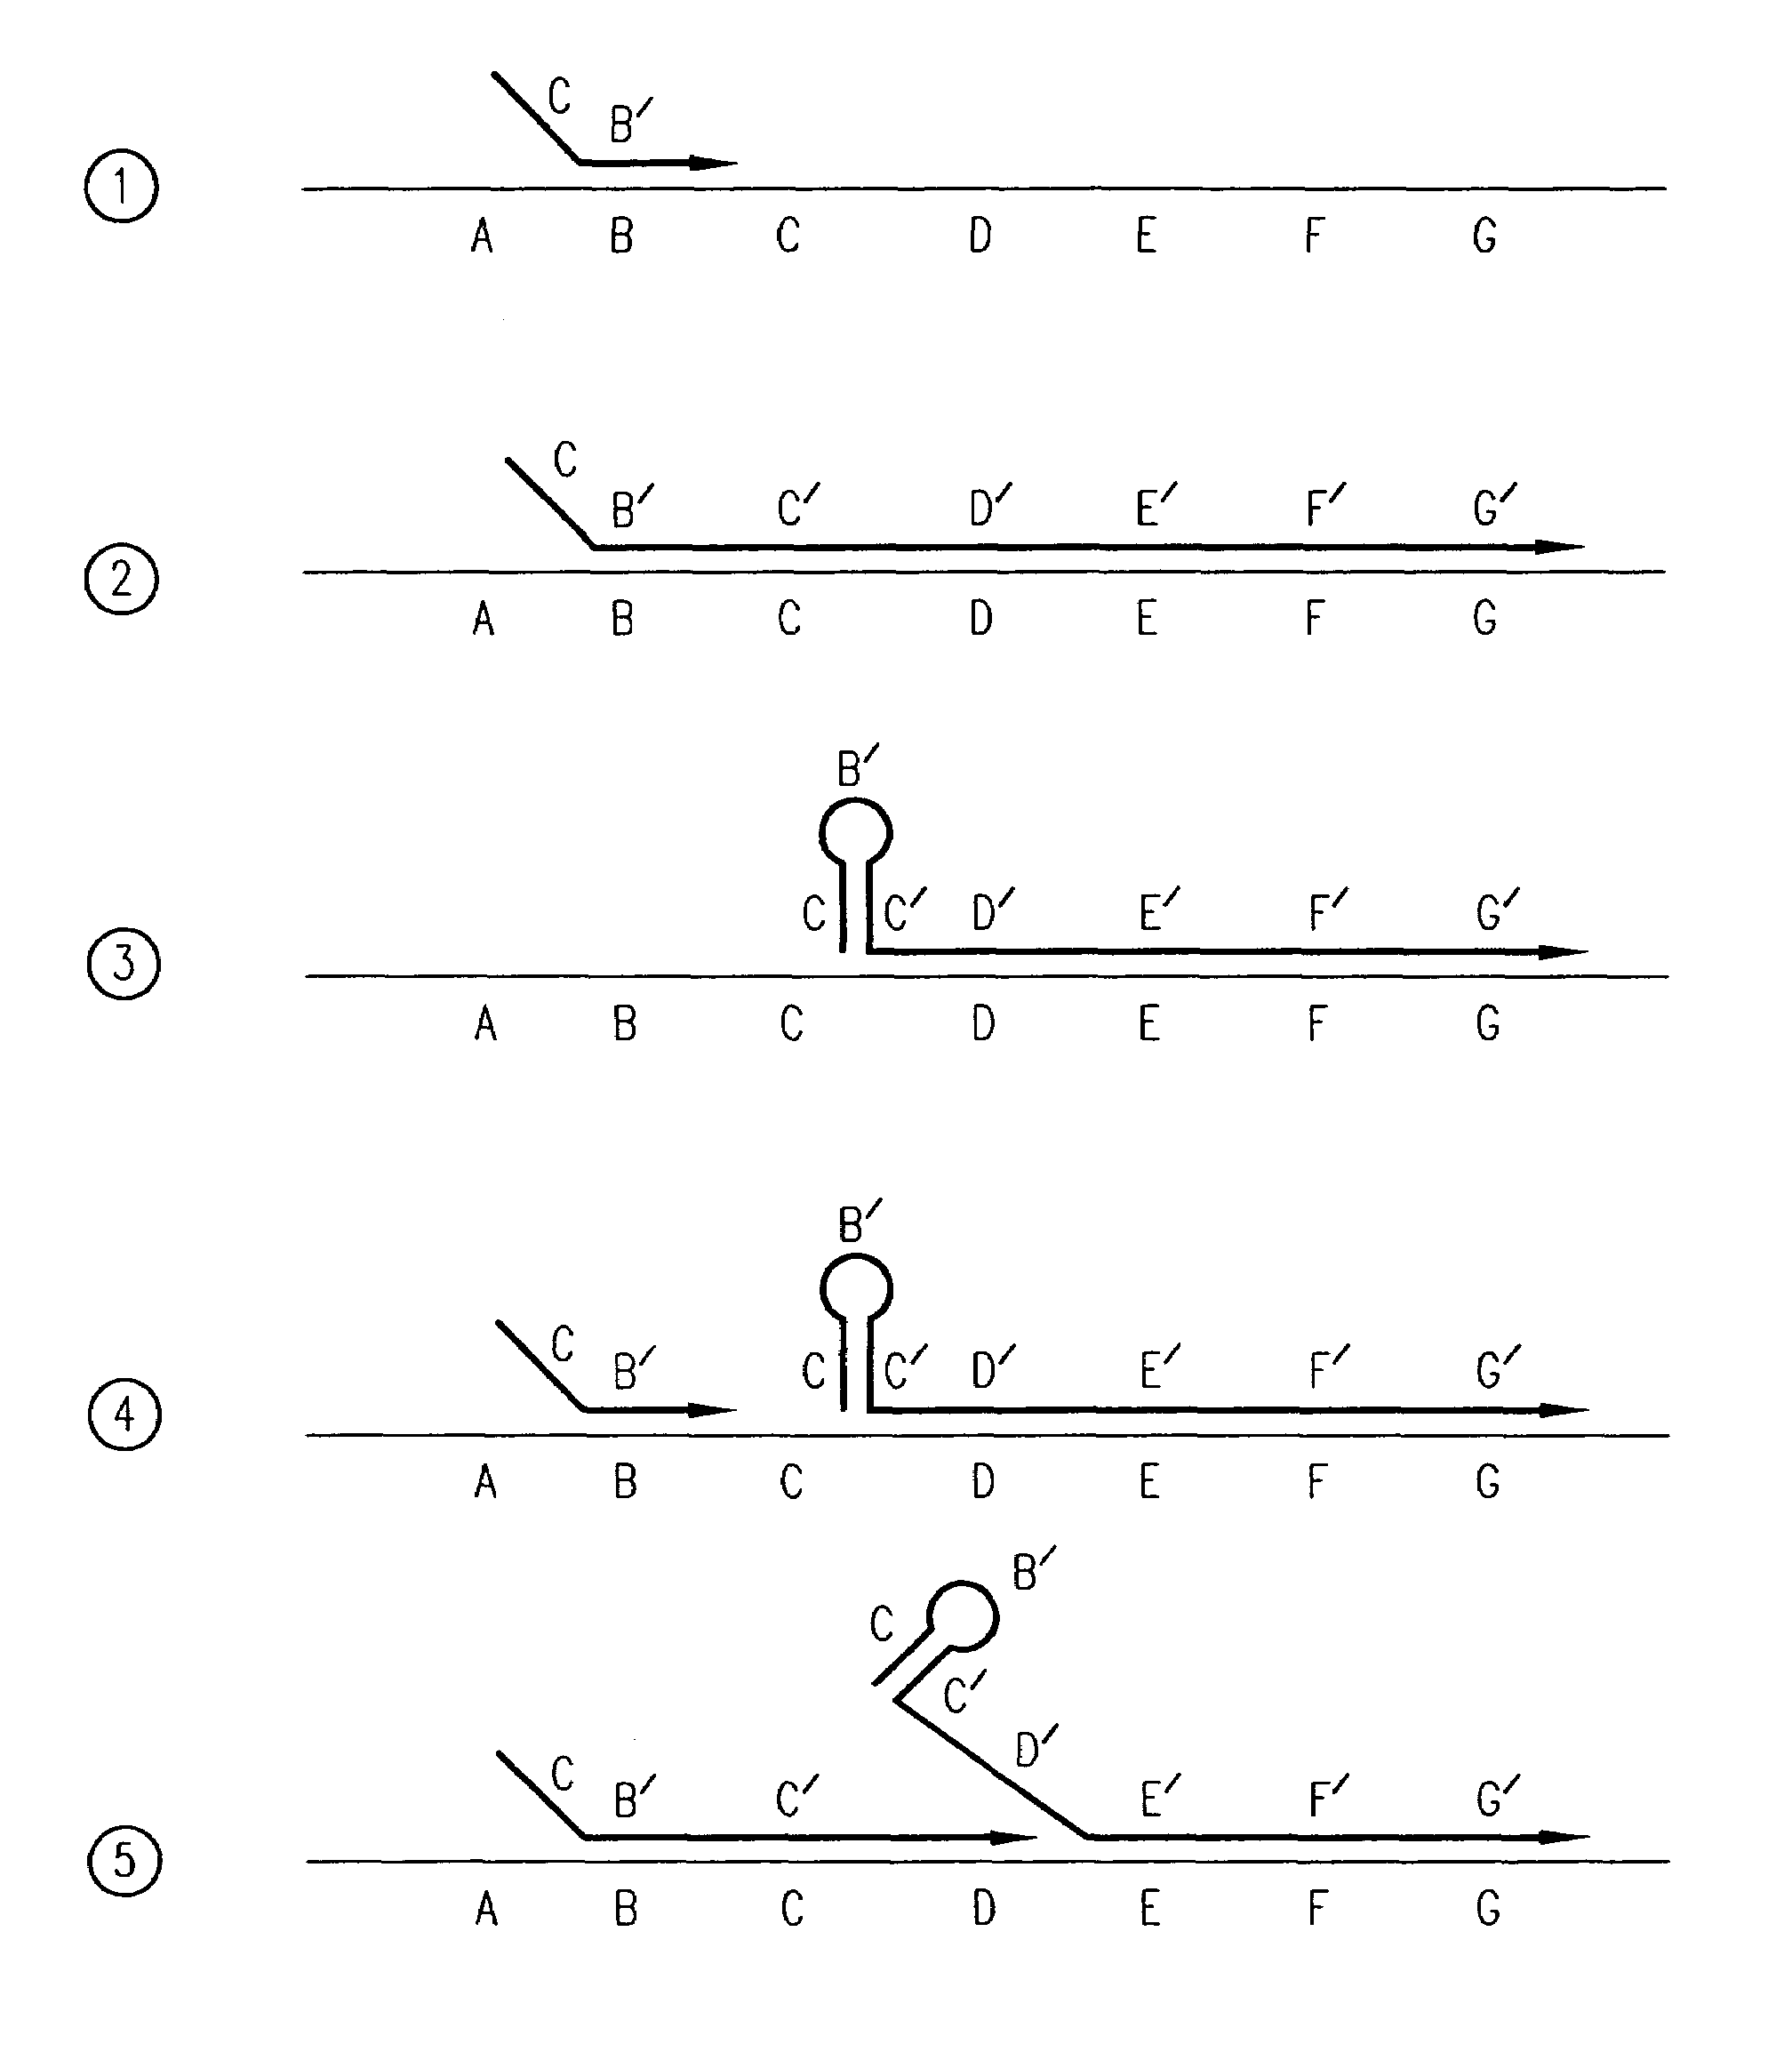 Processes for non-linearly amplifying nucleic acids